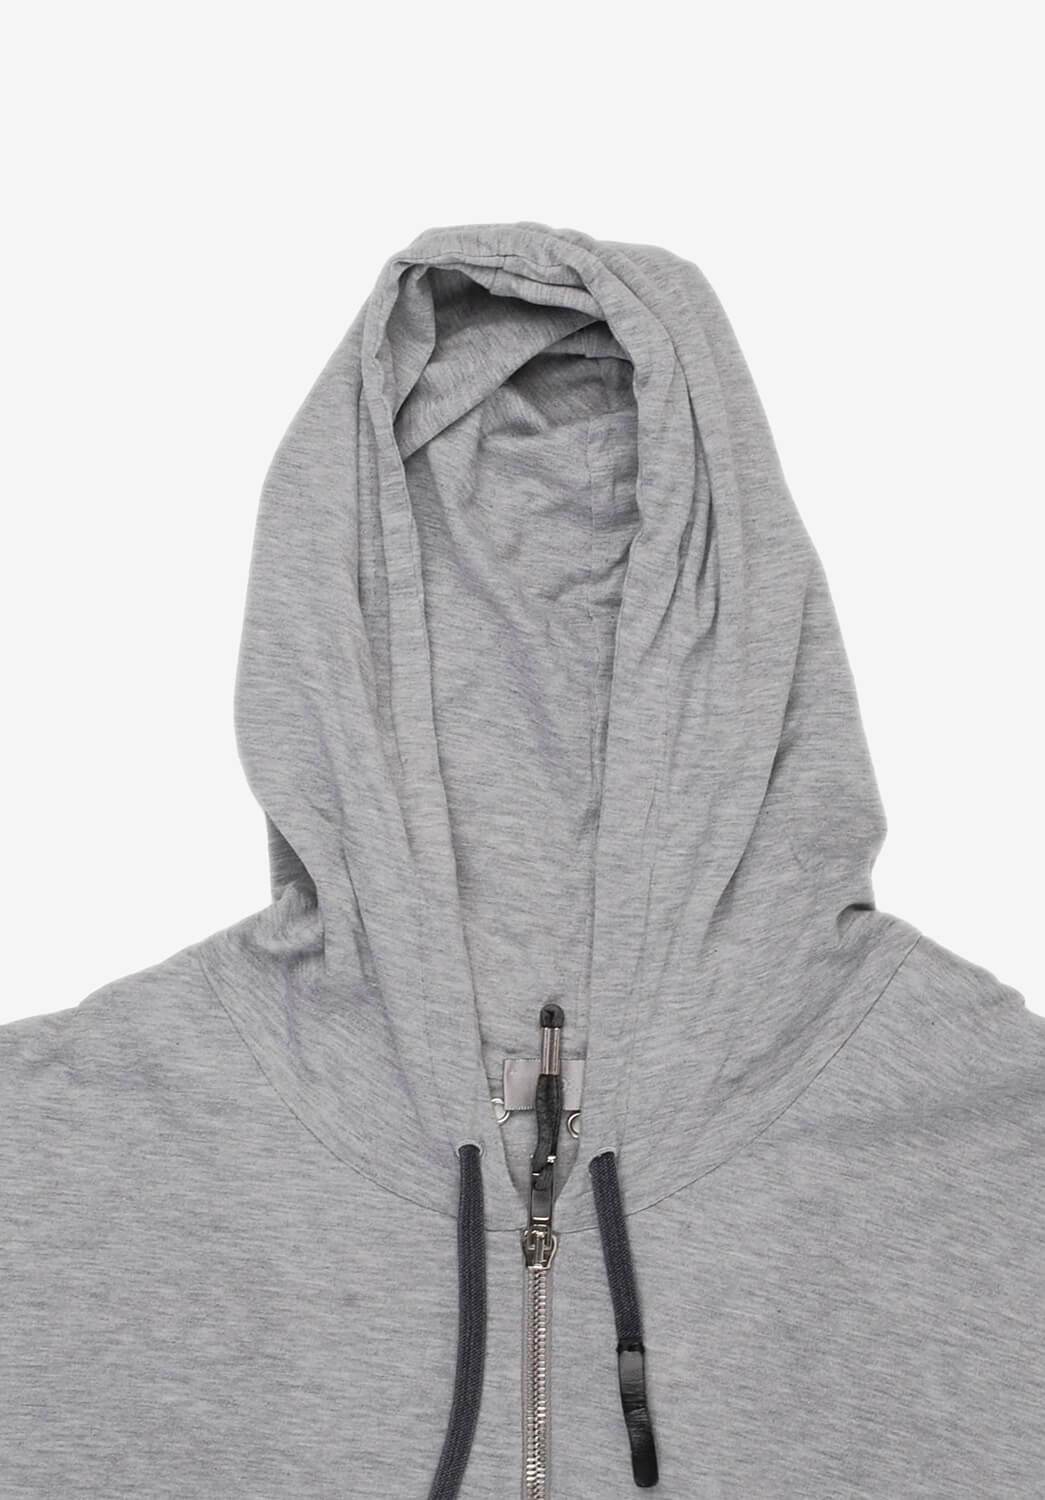 Item for sale is 100% genuine Dior Homme by Hedi Slimane spring summer 2004
Color: Grey, back is in black color and perforated see trough.
(An actual color may a bit vary due to individual computer screen interpretation)
Material: Faded tag, seems